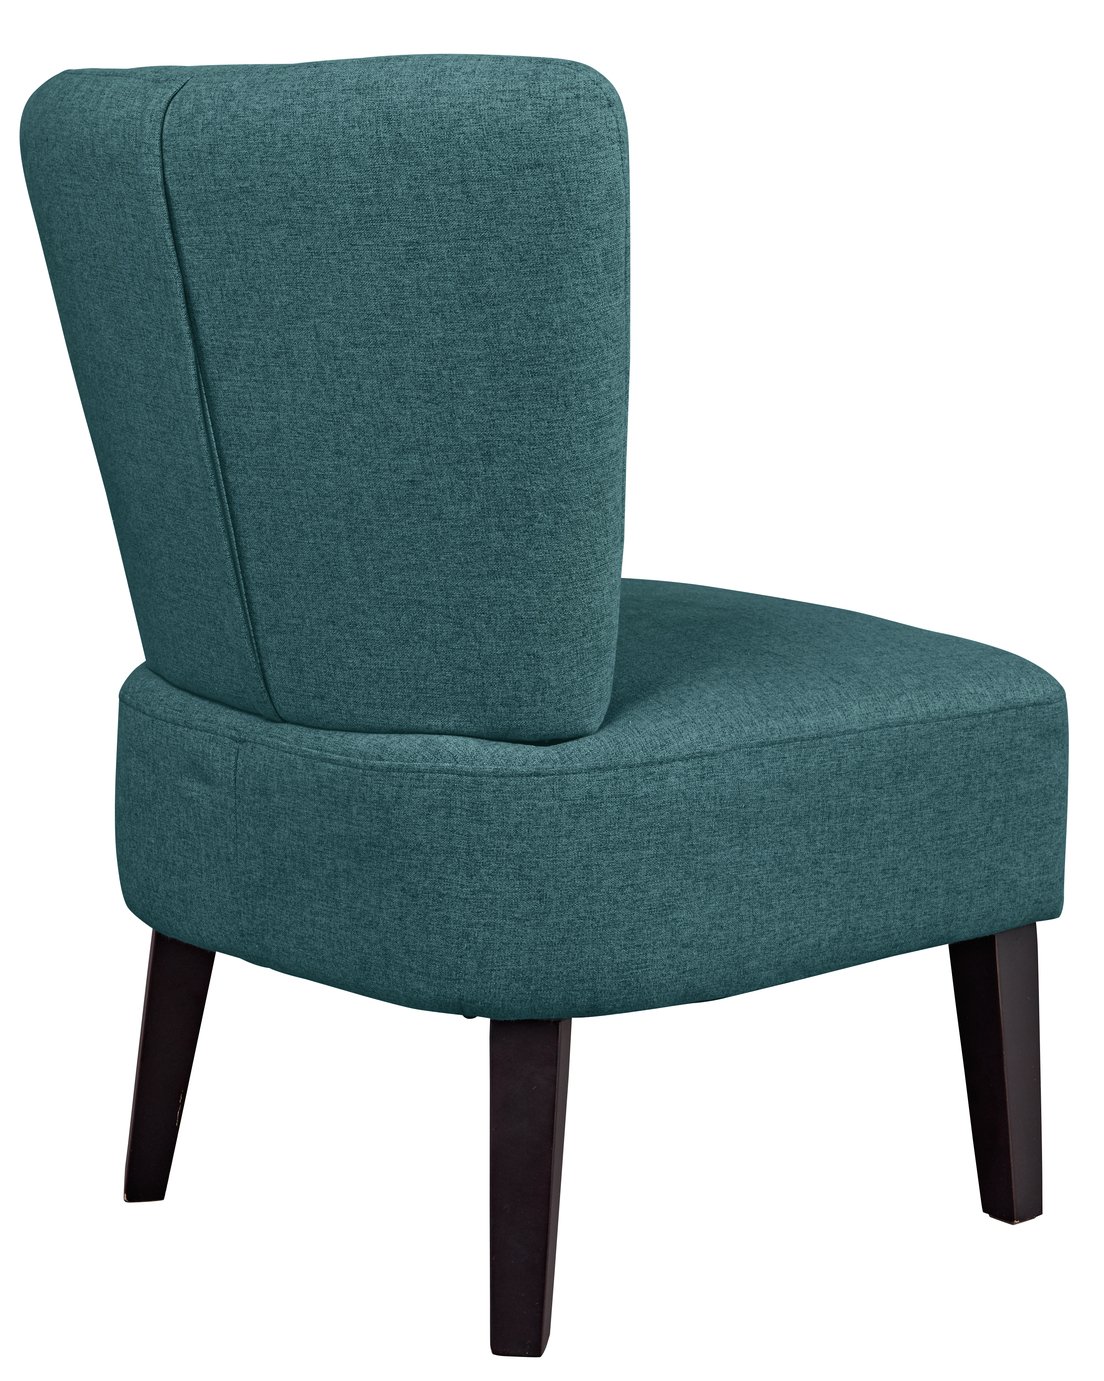 Argos Home Delilah Cocktail Chair Reviews